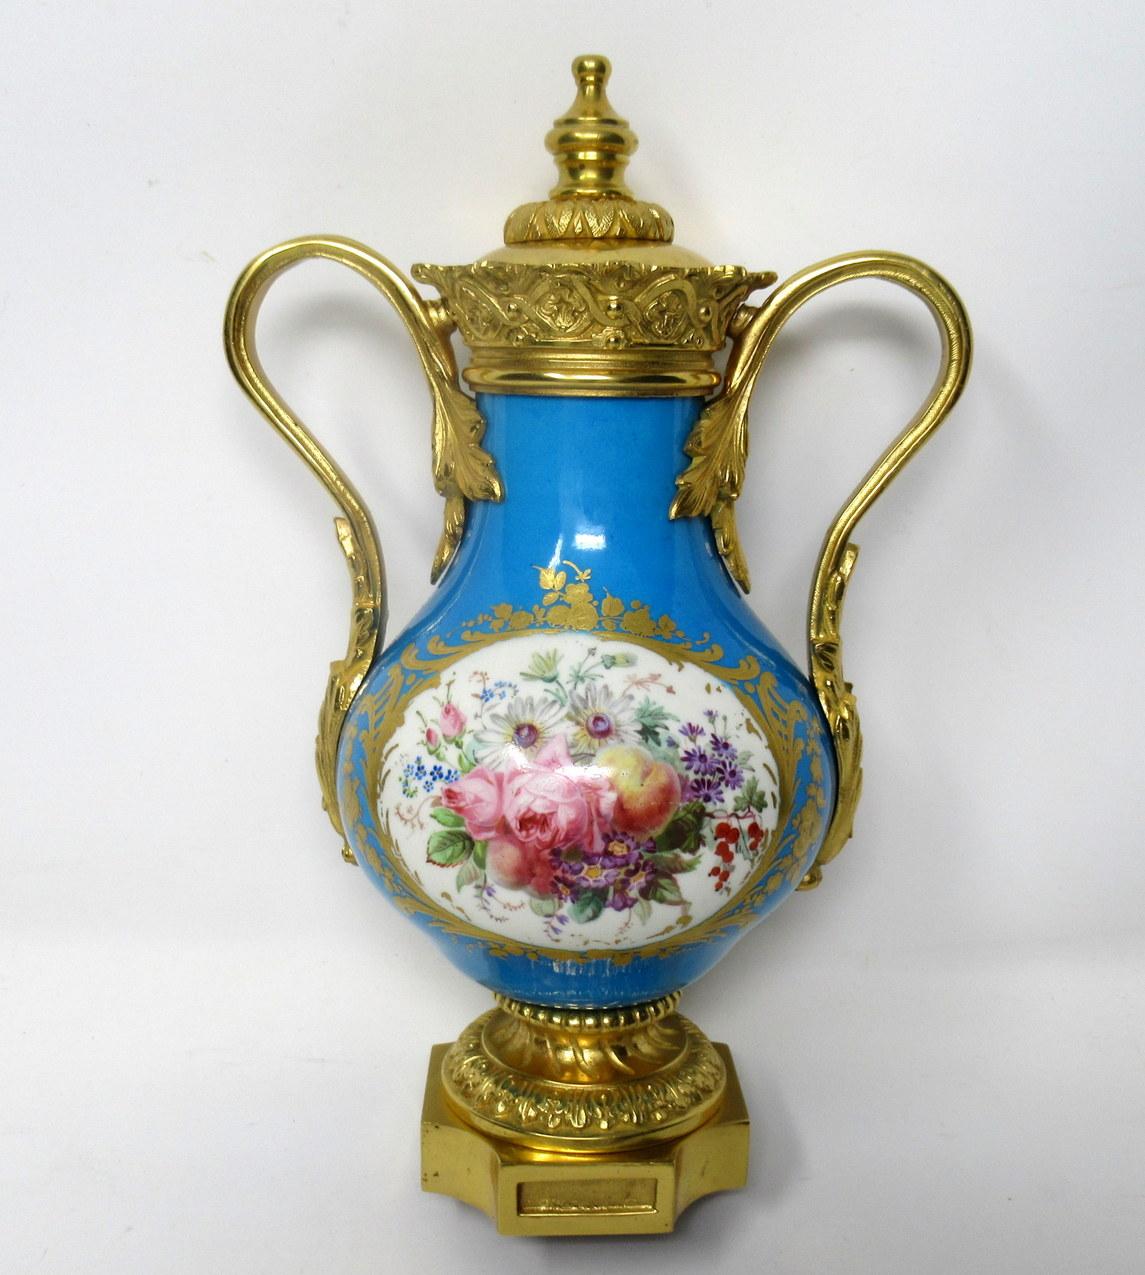 Stunning French Sevres soft paste porcelain and Ormolu twin handle table or mantle urn of traditional bulbous form and of outstanding quality, raised on a square stepped base with canted corners. 

The twin handles exquisitely modelled as